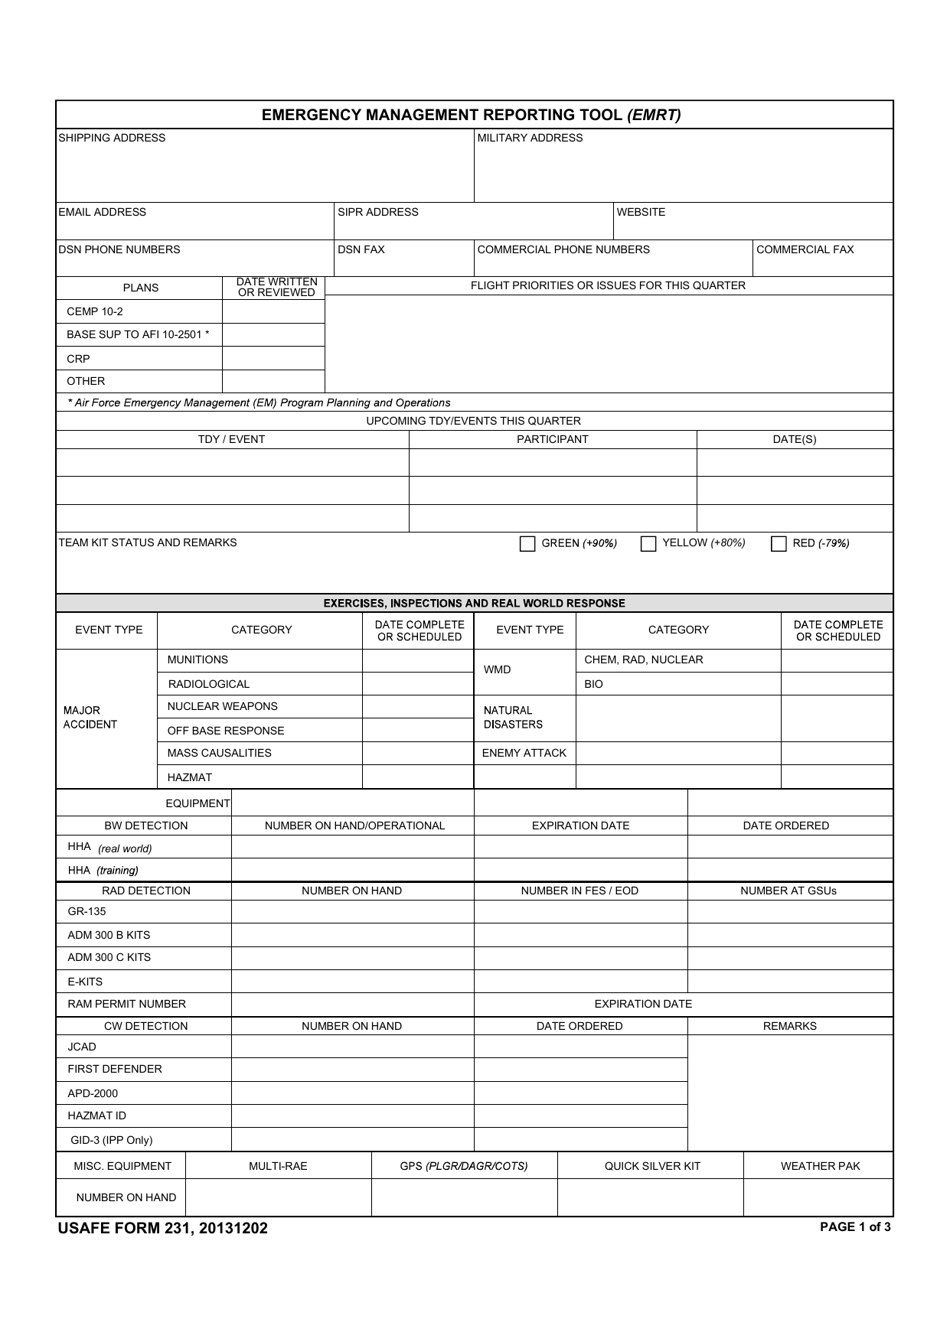 USAFE Form 60 Command / Installation Dangerous Goods Advisor Annual Report, Page 1